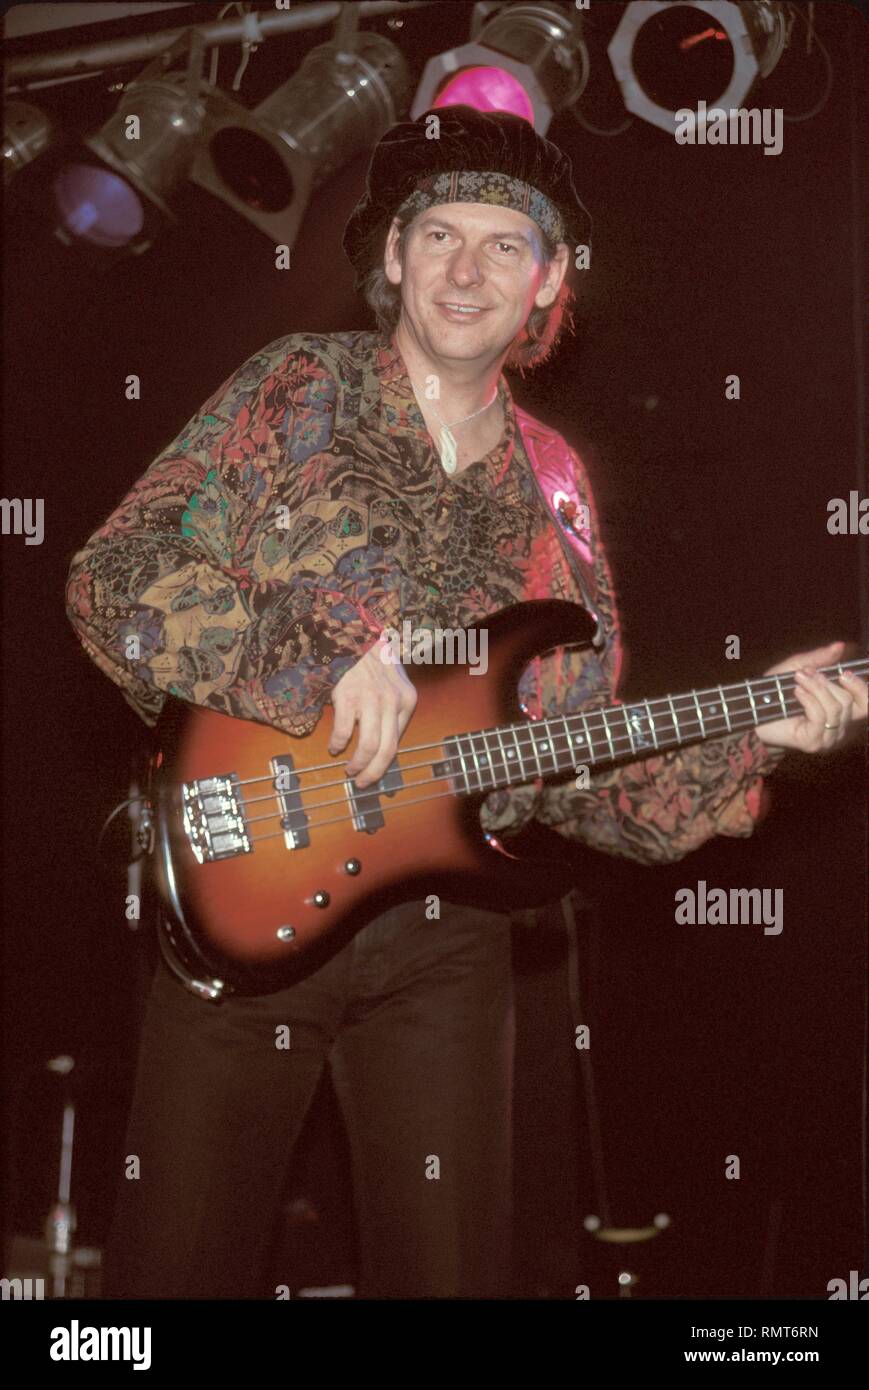 Arc Angels bassist Tommy Shannon is shown having fun on stage during a  concert performance Stock Photo - Alamy